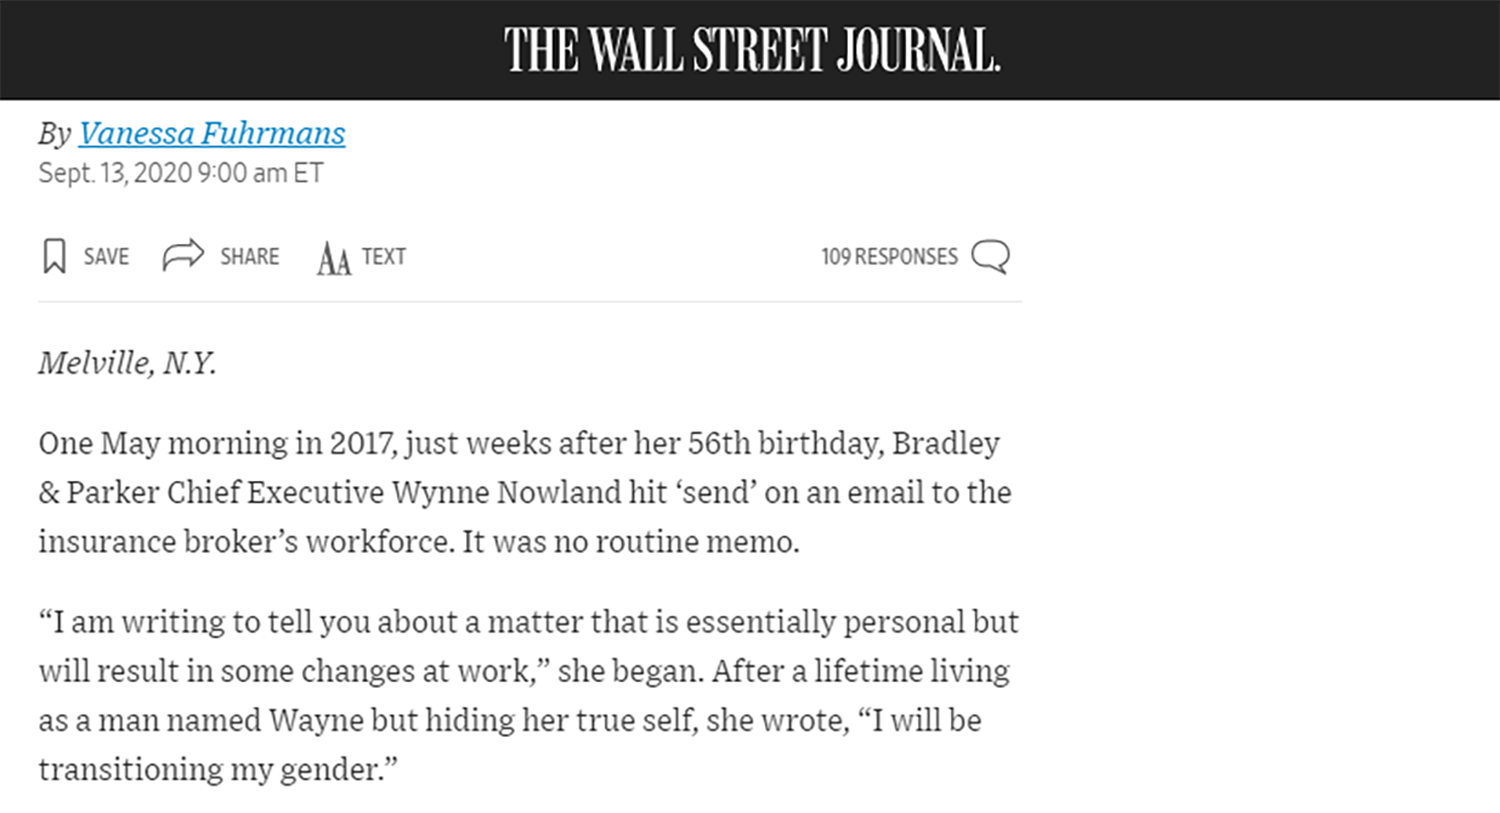 ceo-wynne-nowland-featured-in-the-wall-street-journal